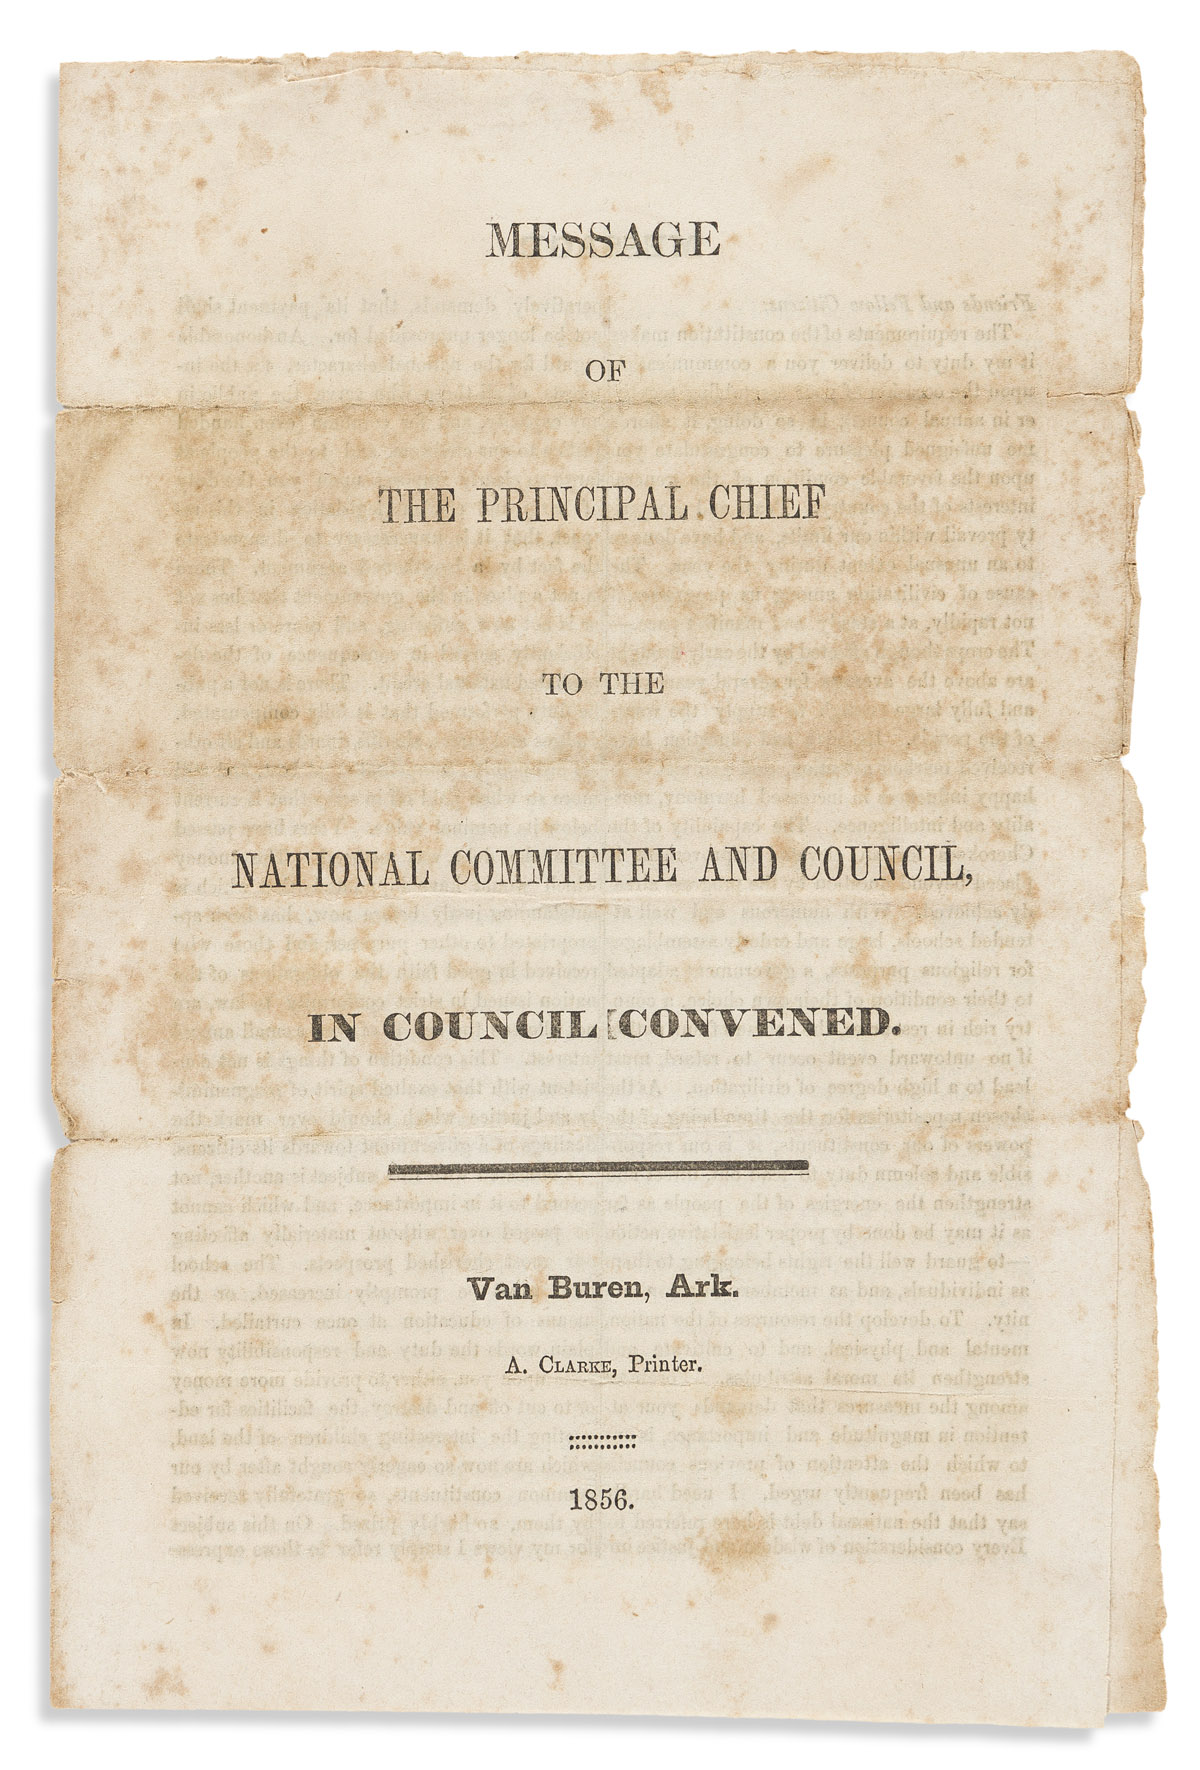 (AMERICAN INDIANS.) John Ross. Message of the Principal Chief to the National Committee and Council.